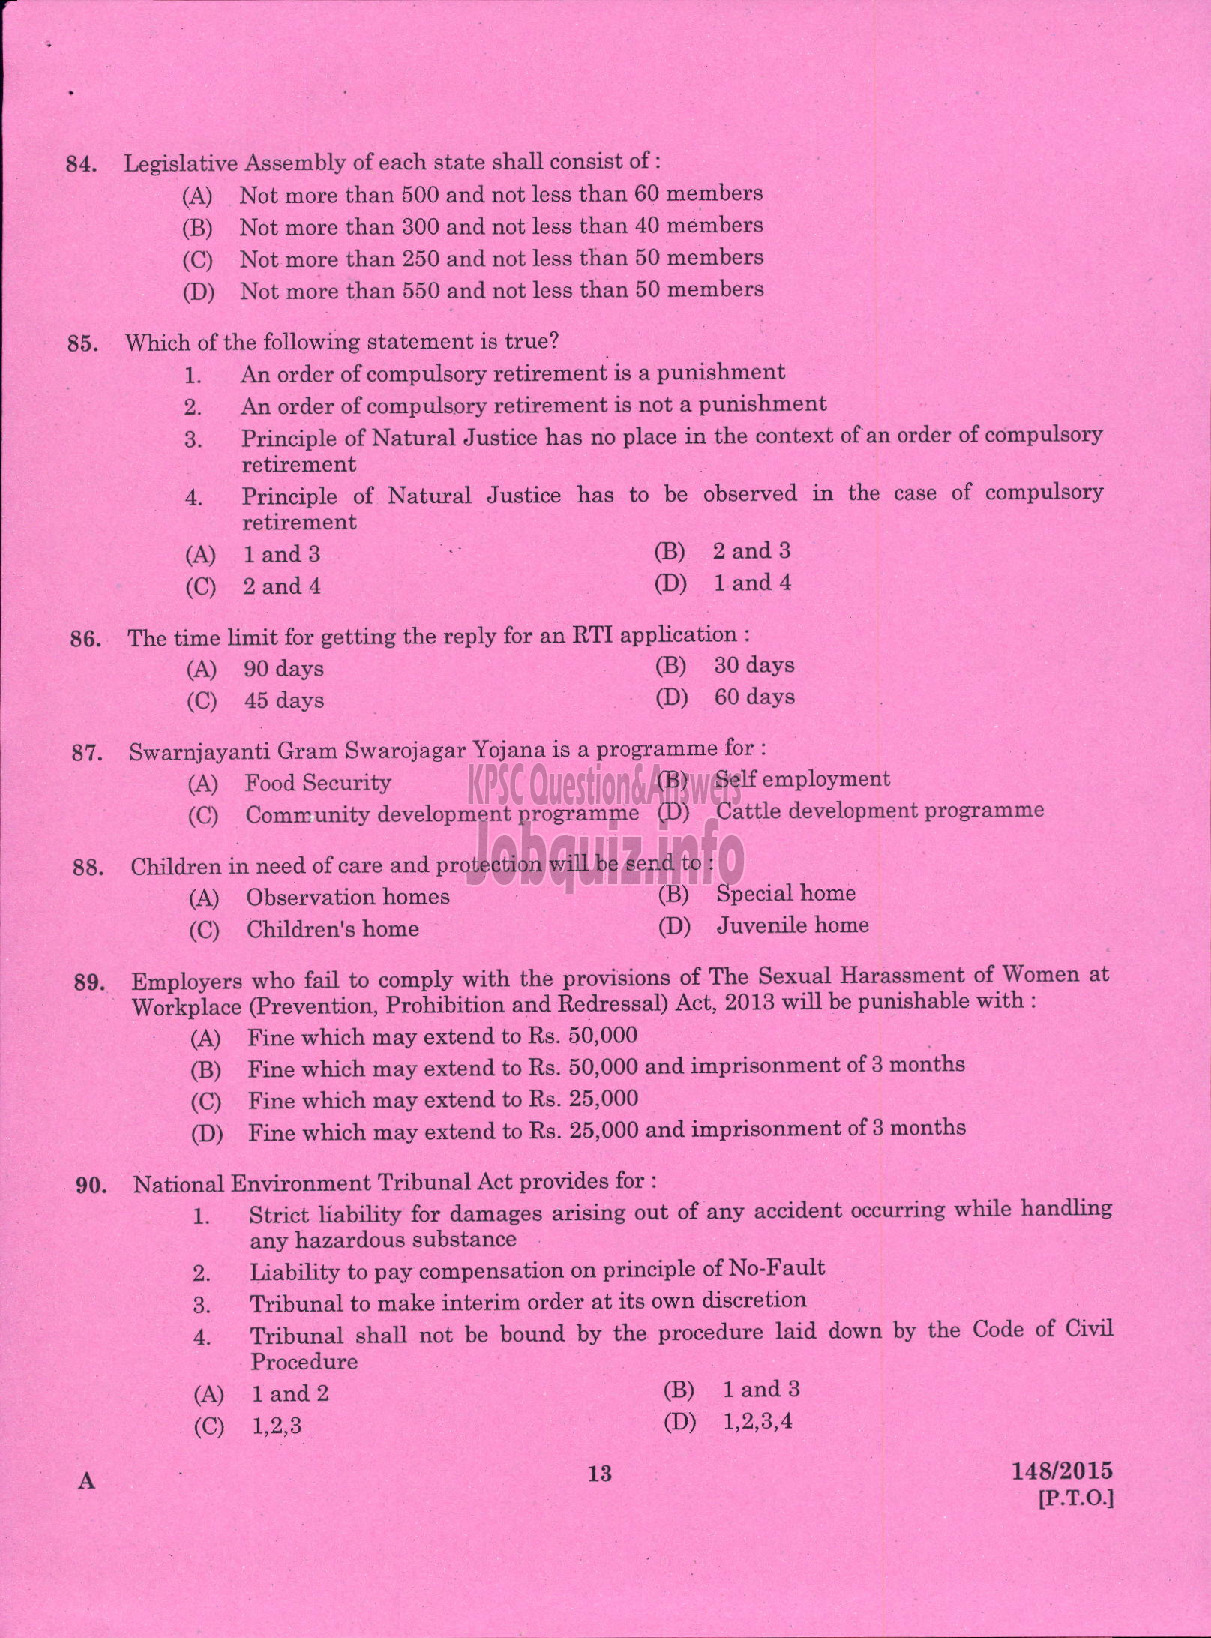 Kerala PSC Question Paper - LECTURER IN HOMESCIENCE FOOD AND NUTRITION COLLEGIATE EDUCATION-11